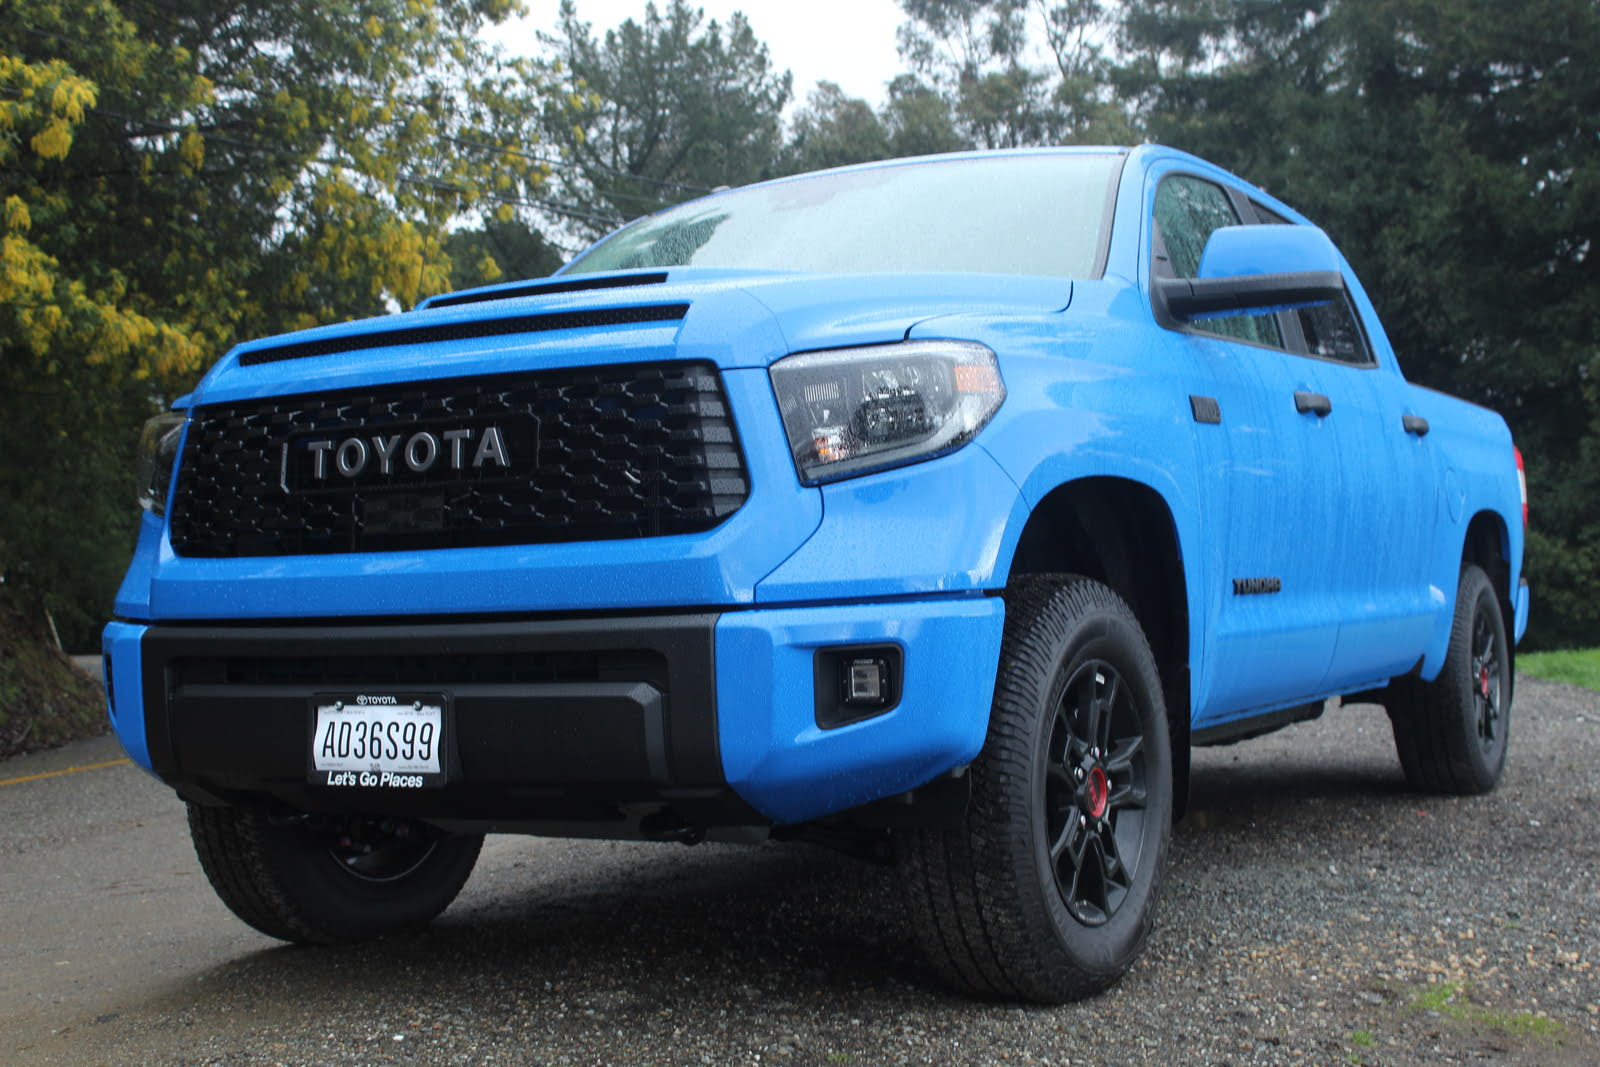 Video Review: 2019 Toyota Tundra Expert Test Drive - CarGurus